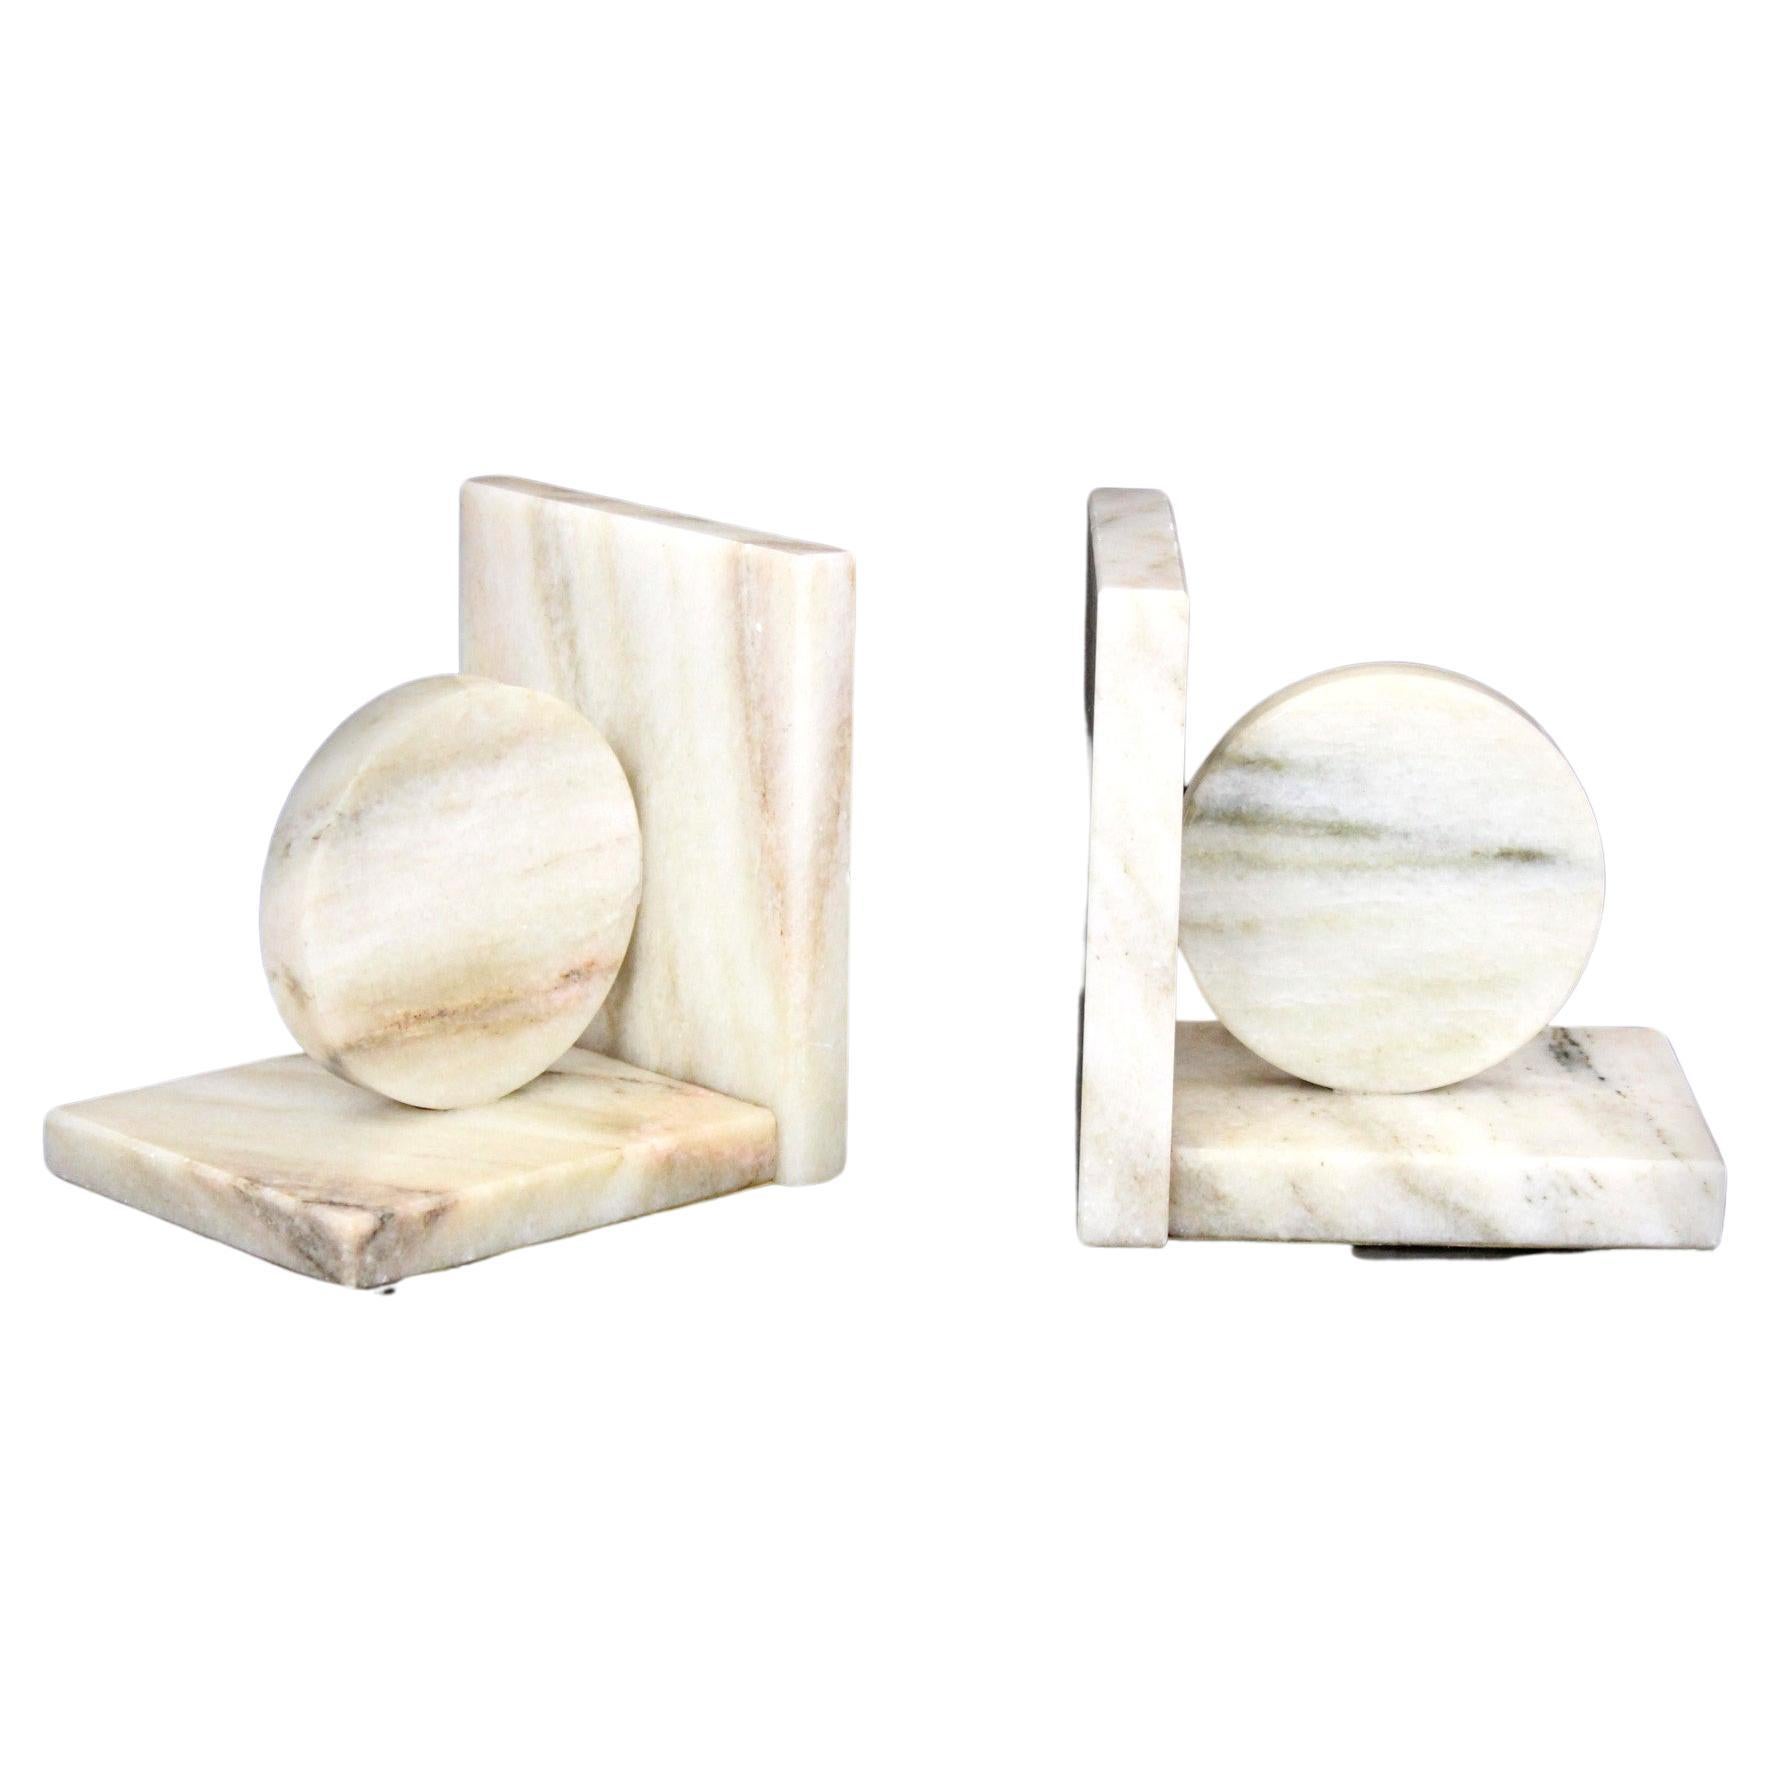 Marble Art Deco Bookends from Semerak, Set of 2